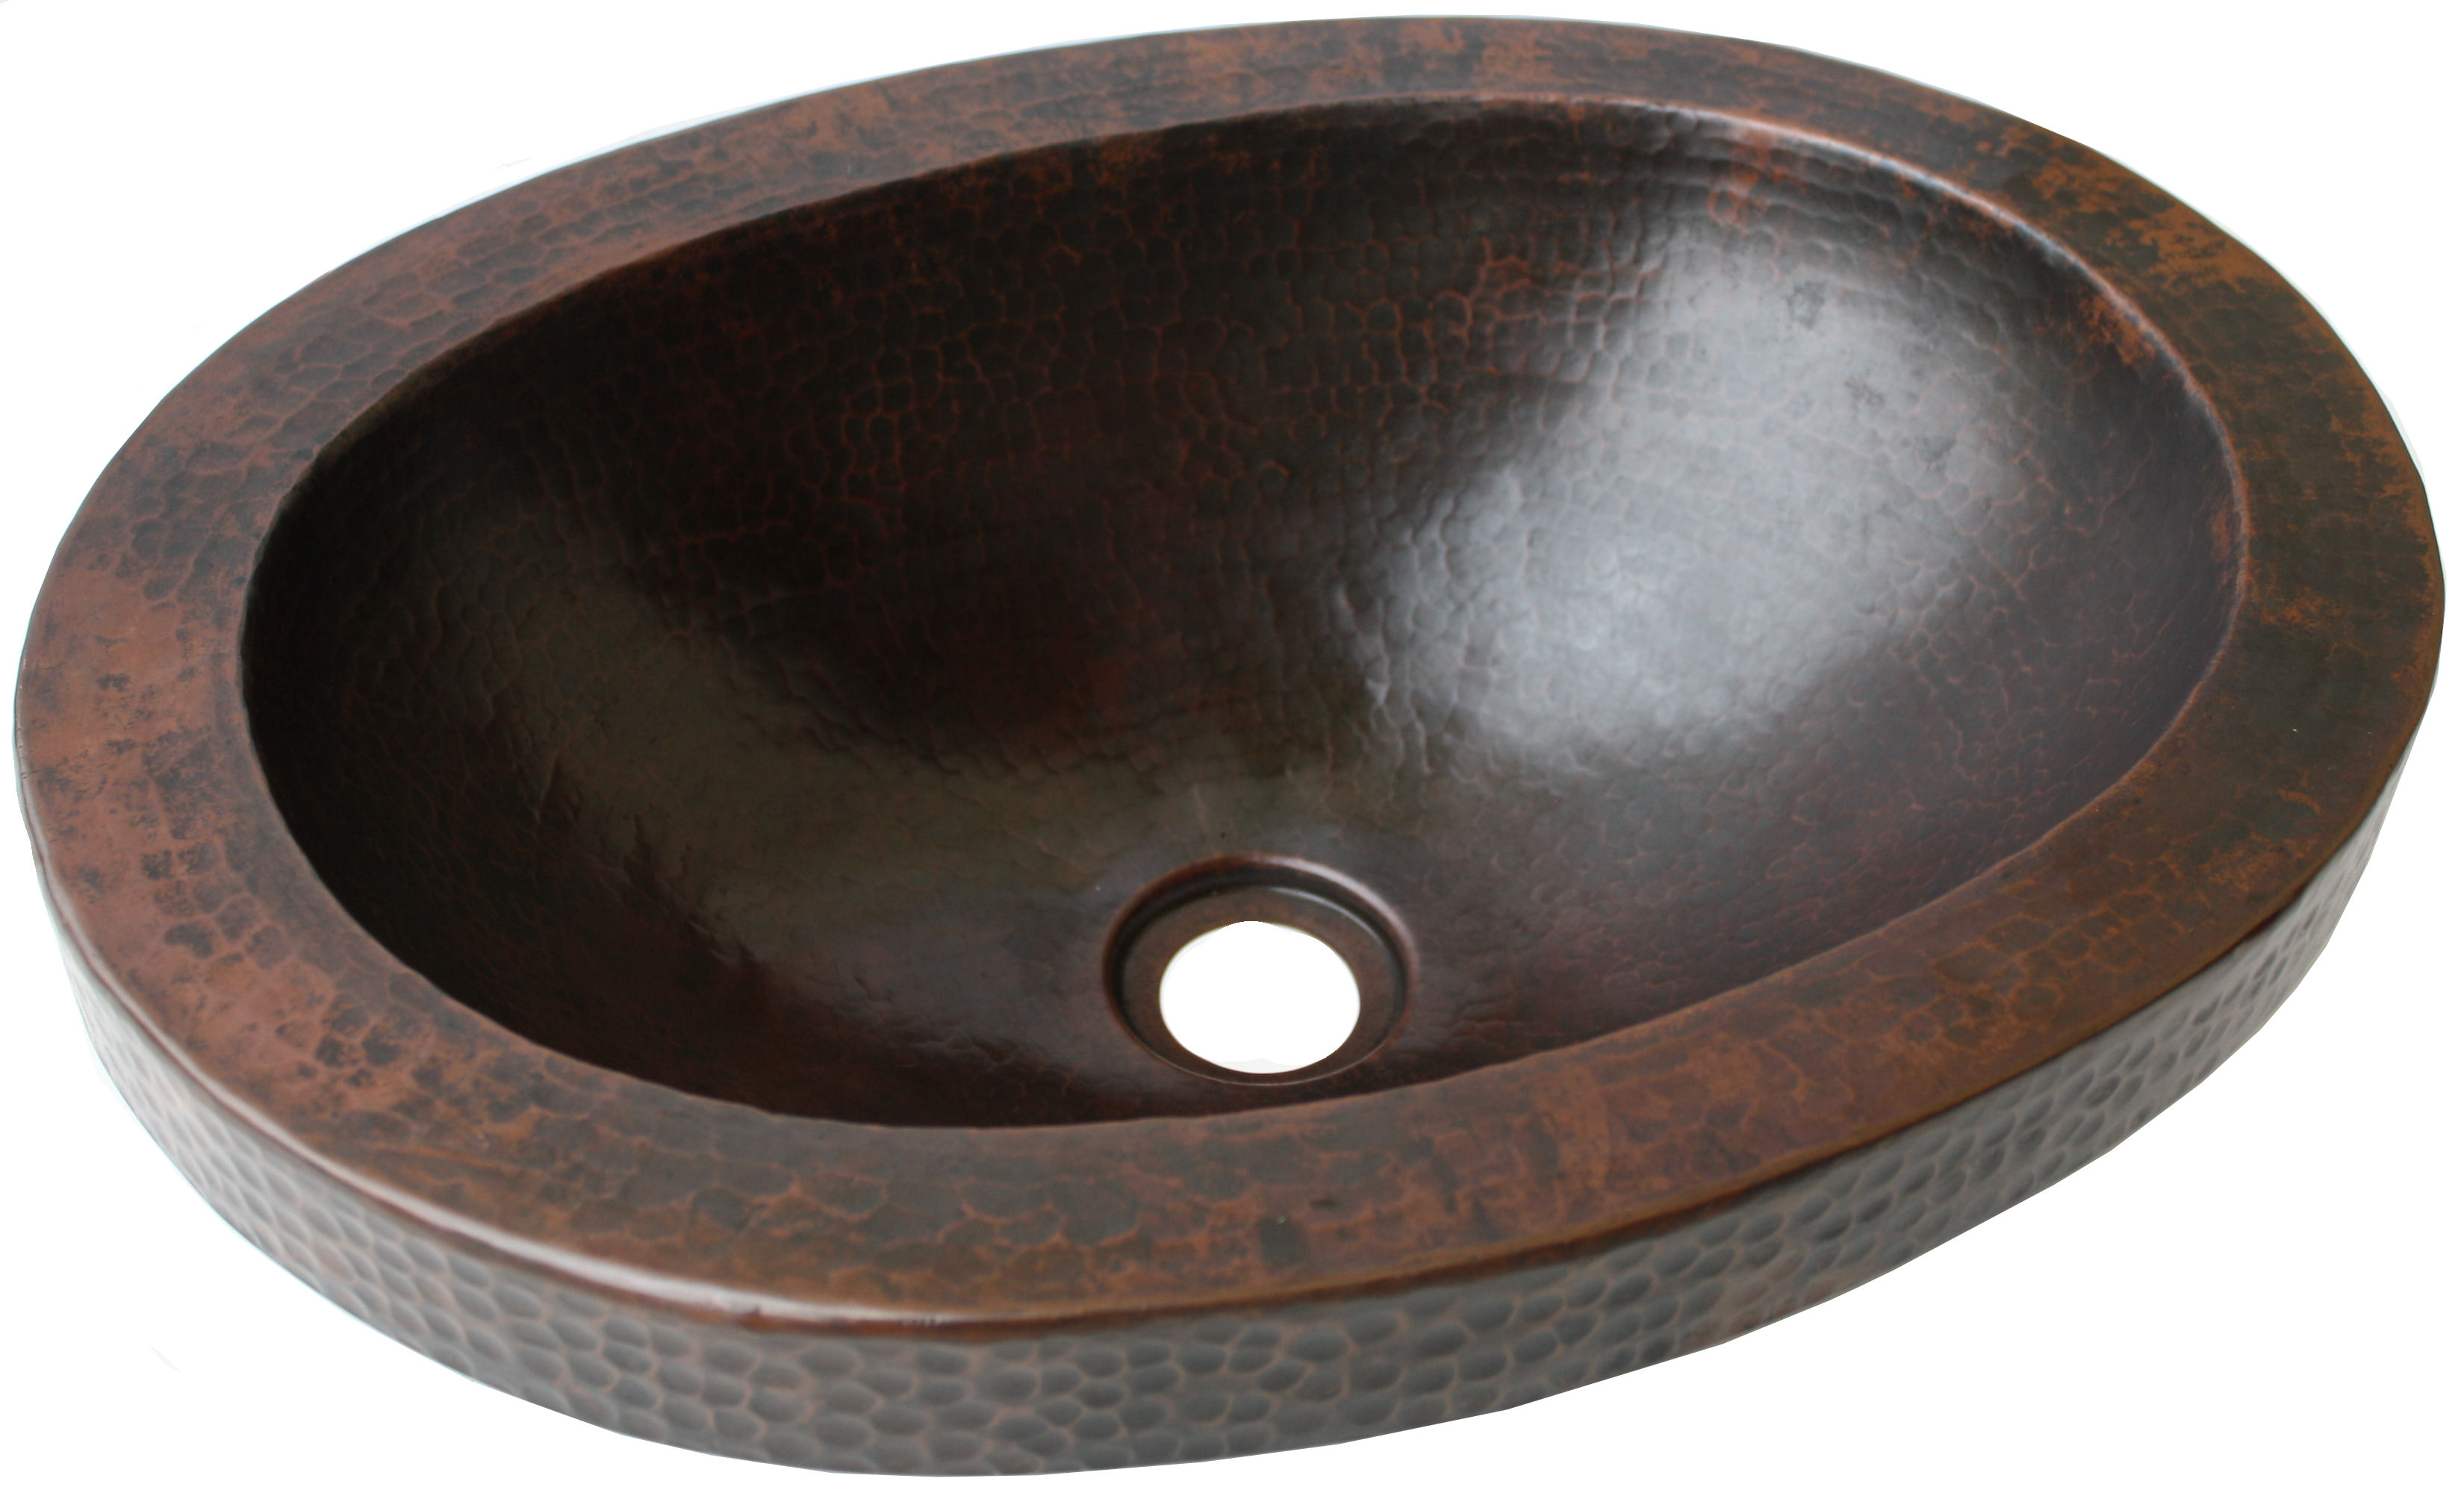 Apron Oval Hammered Bathroom Copper Sink